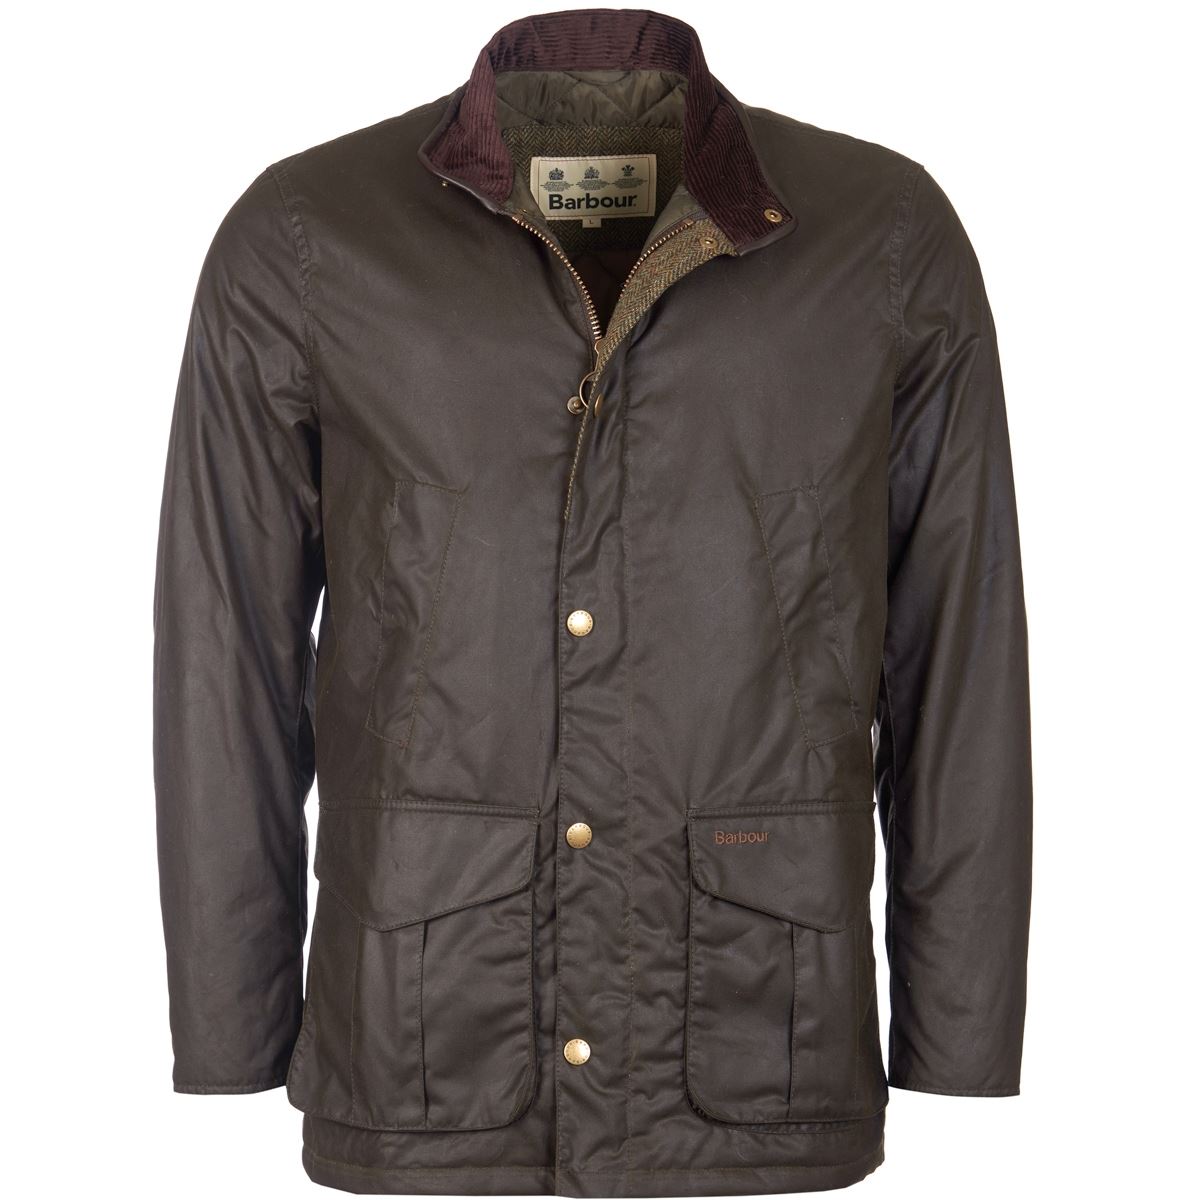 What are the care instructions for the Barbour Hereford jacket?